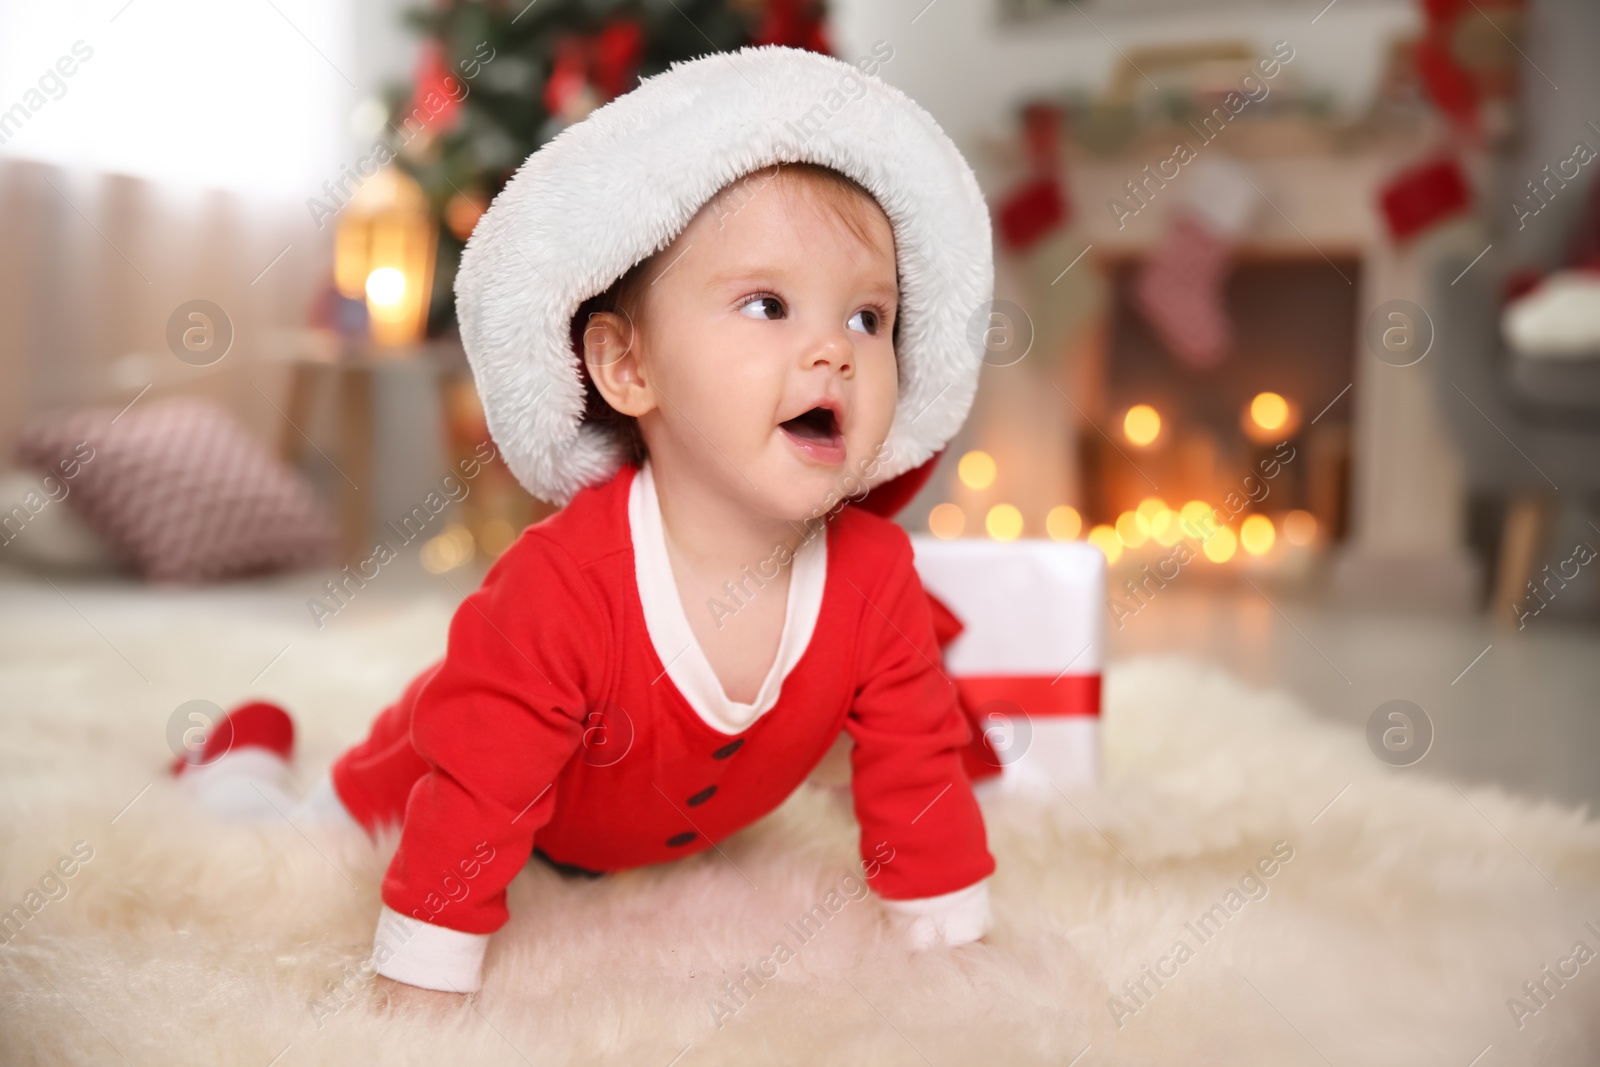 Photo of Cute little baby in Christmas costume crawling on fur rug at home